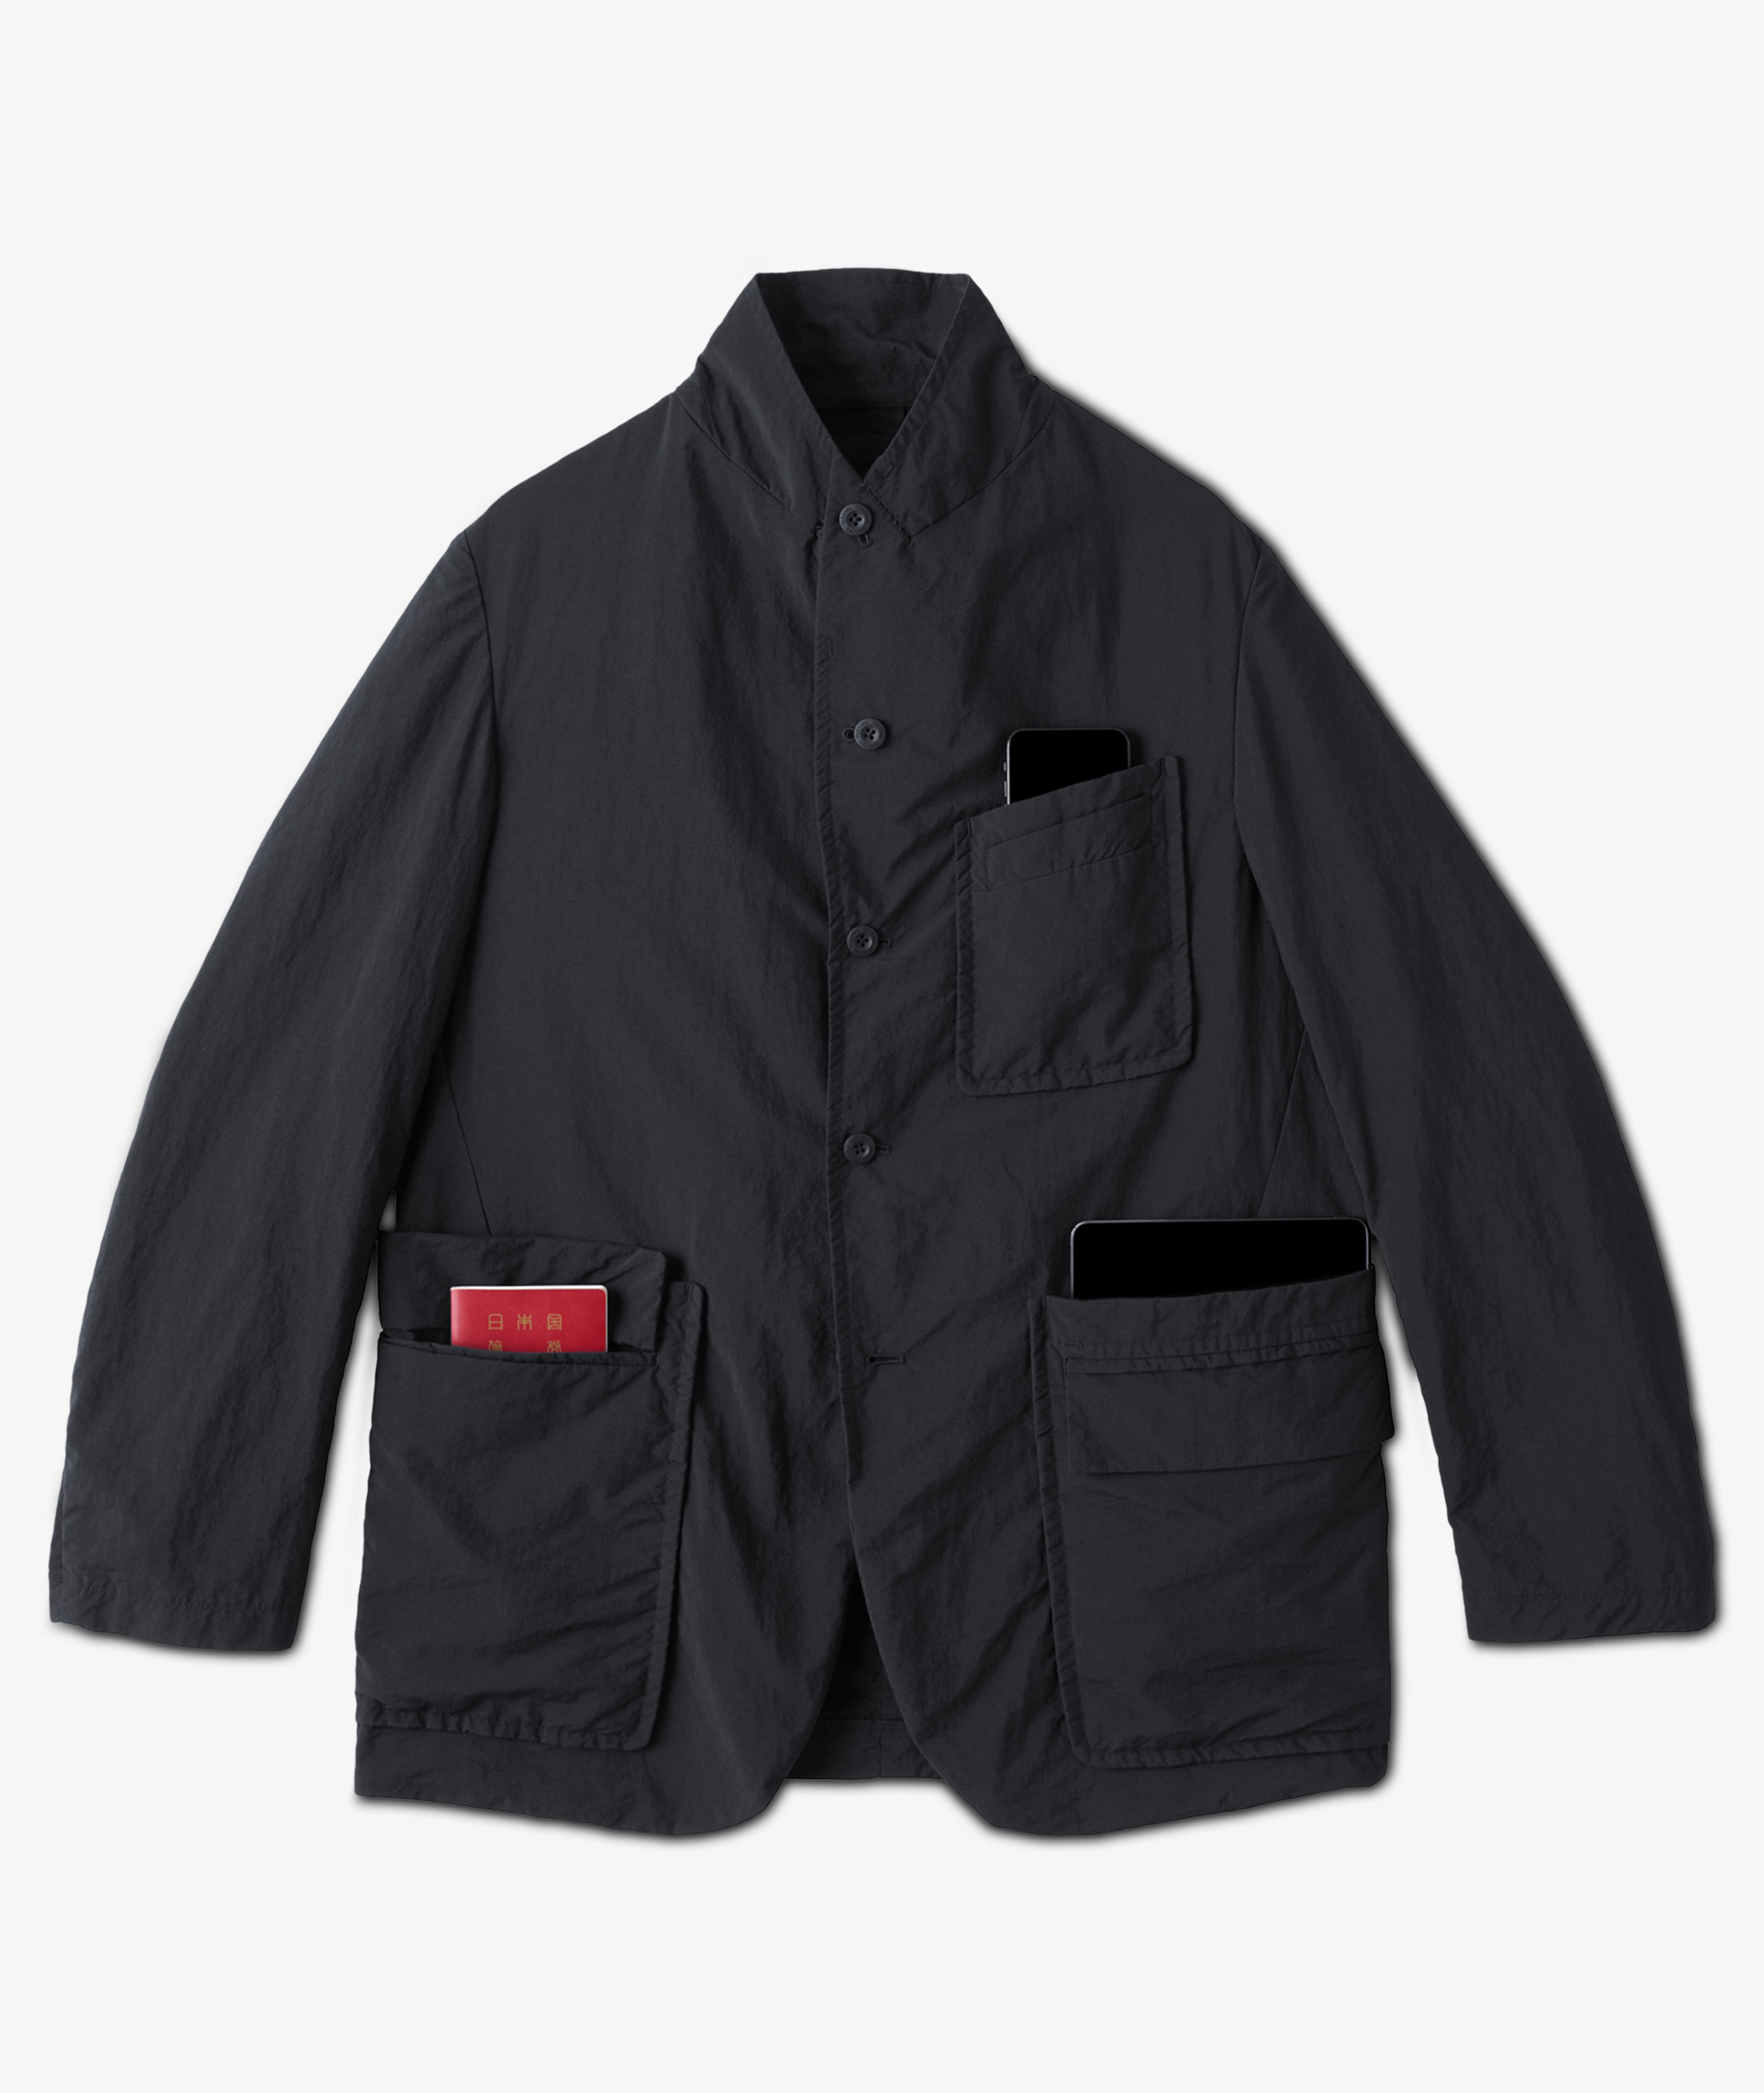 Norse Store | Shipping Worldwide - TEÄTORA Packable CW Jacket 